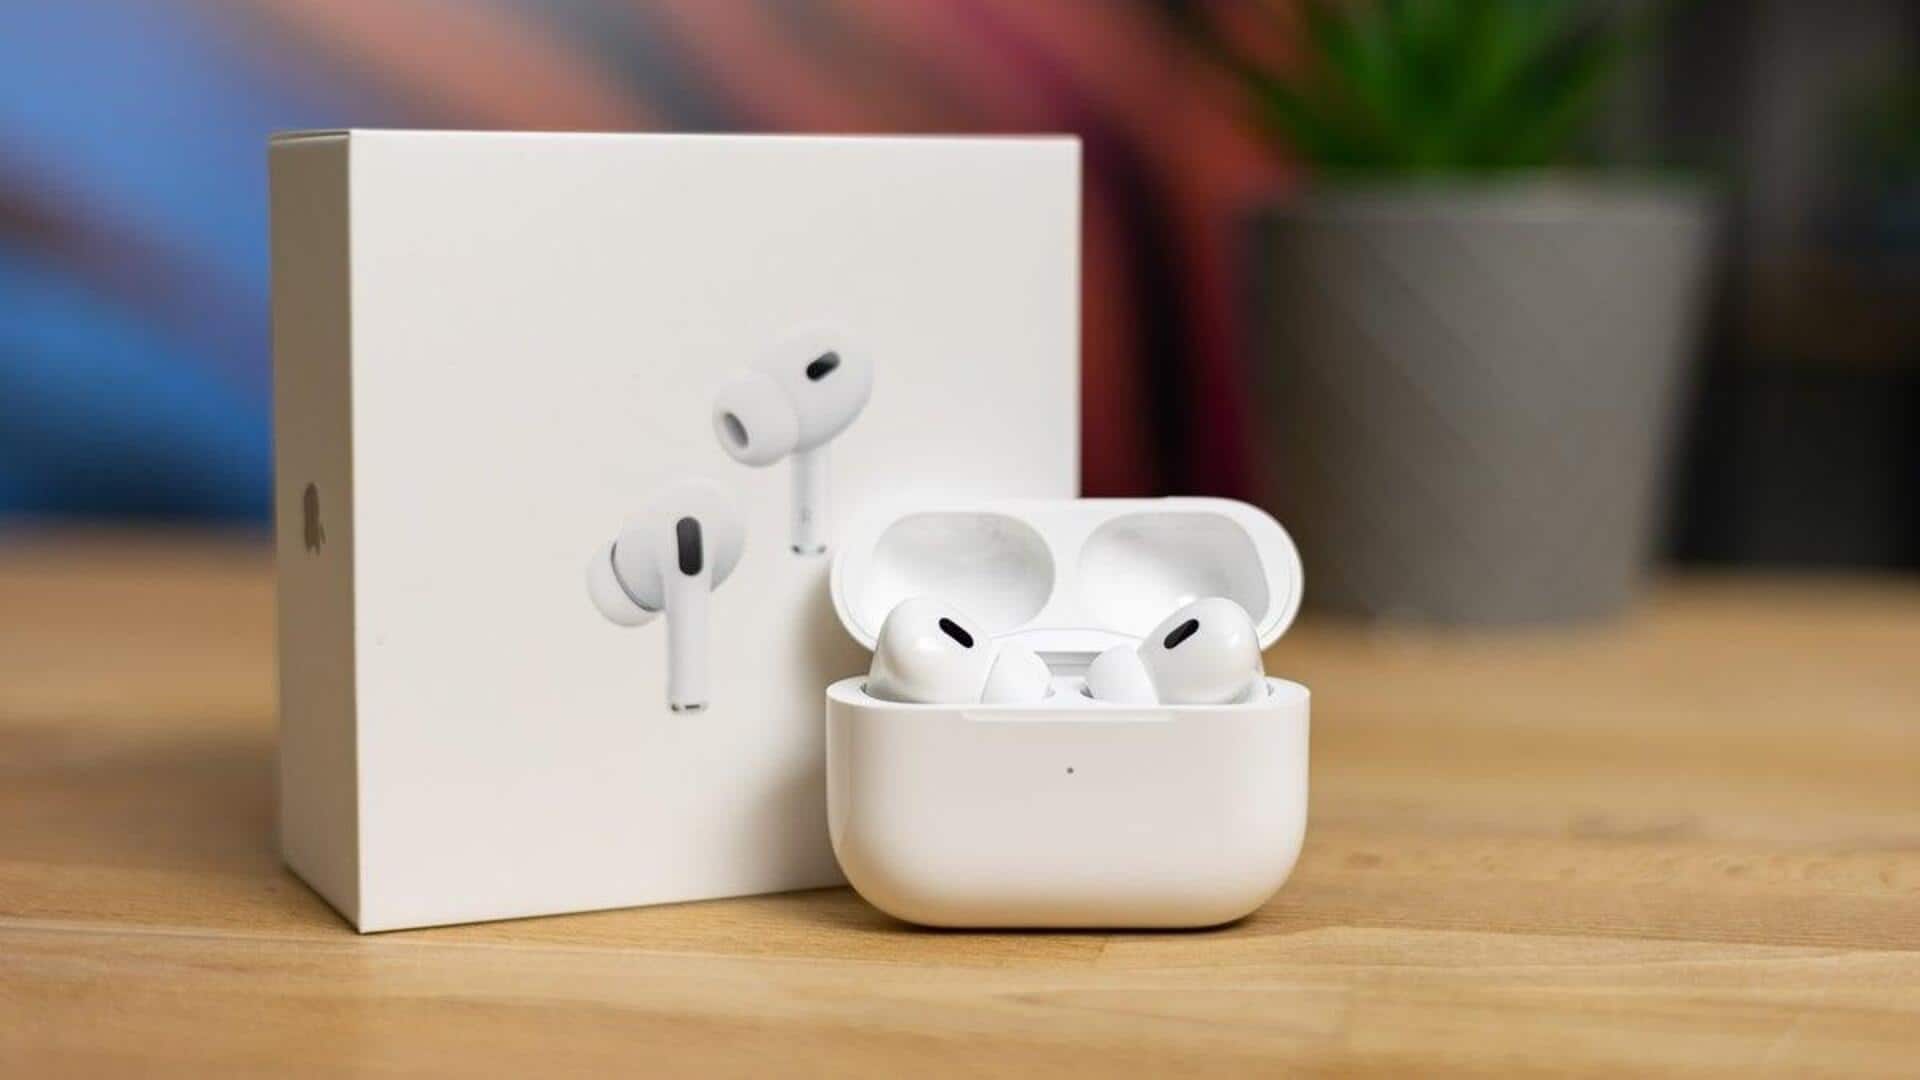 Samsung's Galaxy Buds3 Pro to feature Apple AirPods Pro-like design